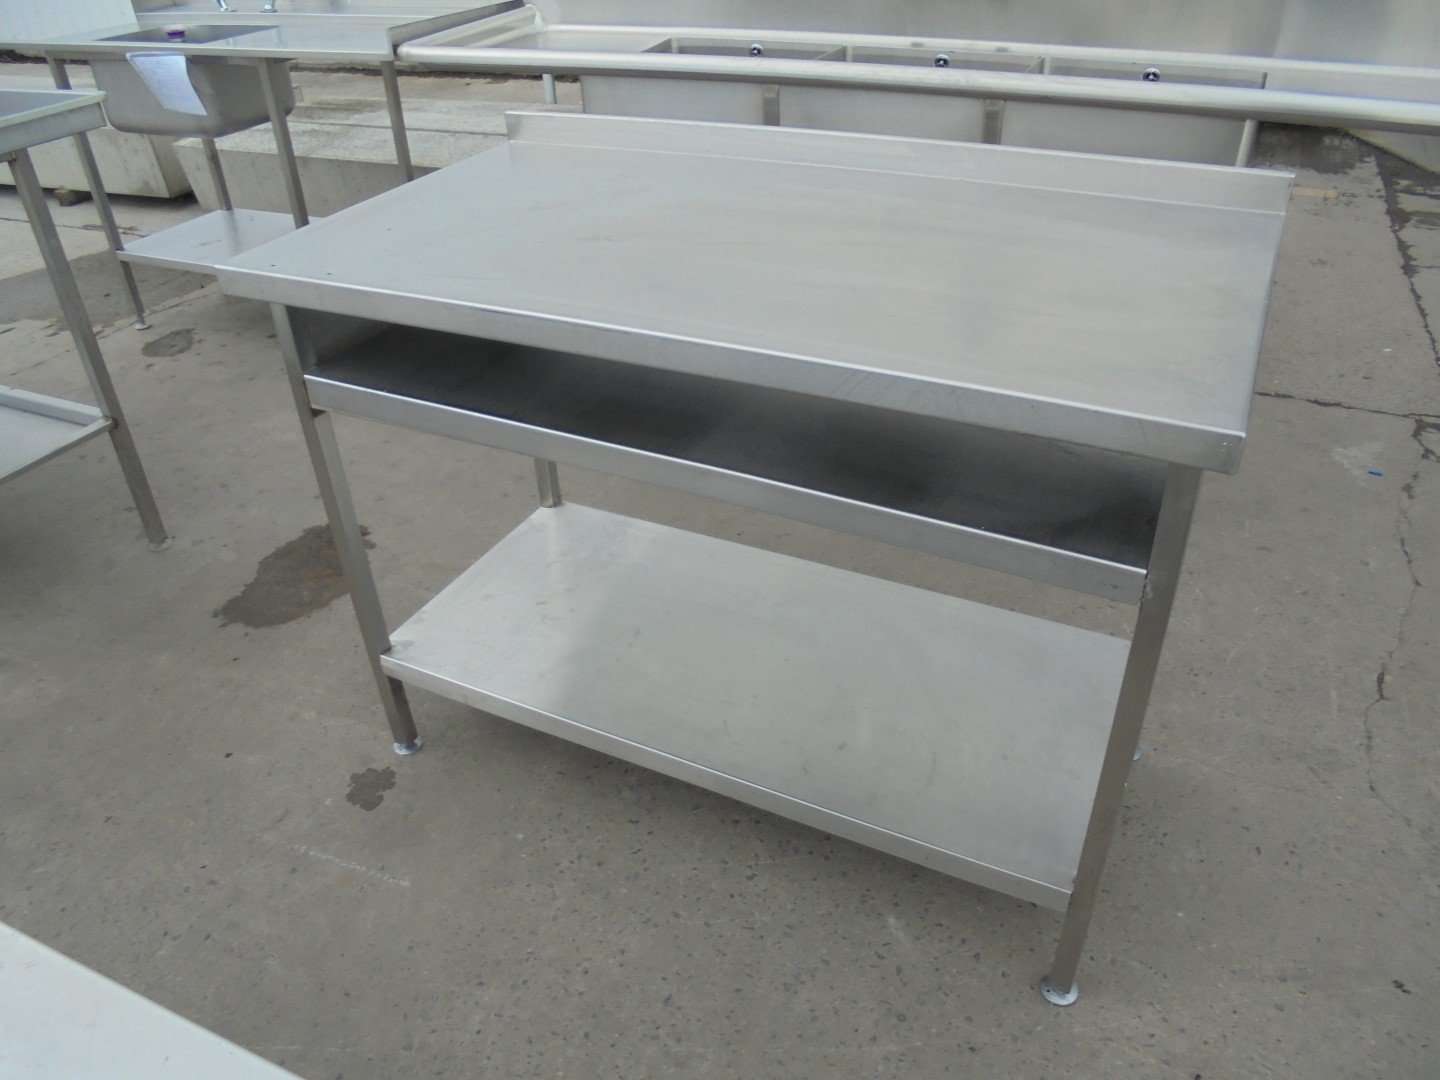 Used Stainless Steel Table | Work Bench Prep Kitchen Food Restaurant Stainless Steel Prep Table Used